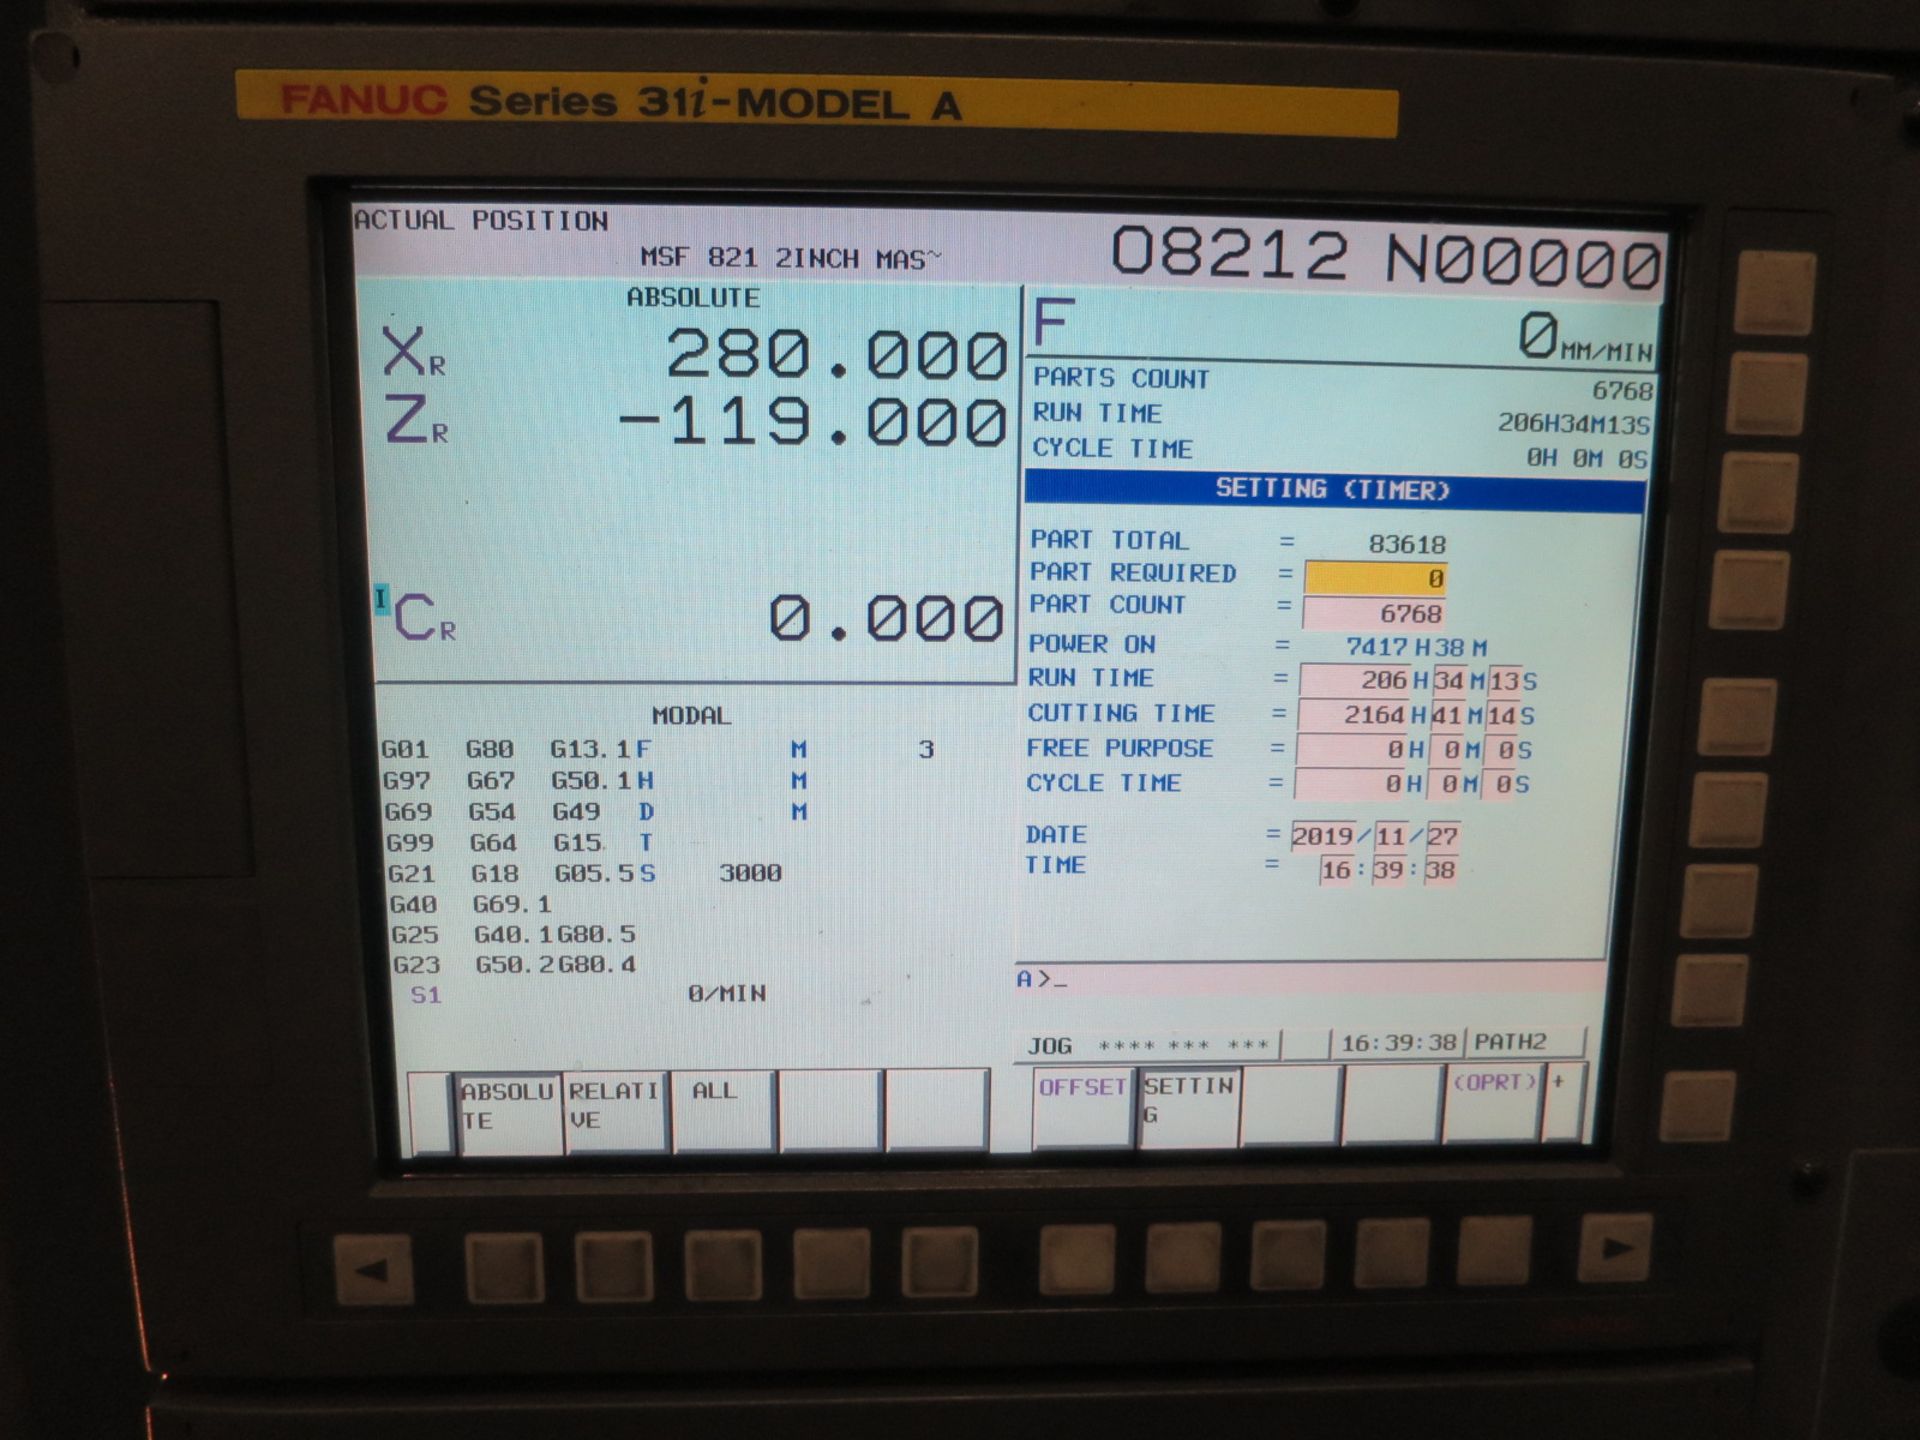 Okuma 2SP-150HM Twin Spindle 3-Axis Turning Center w/Live Milling, S/N 156690, New 2011 - Image 8 of 12